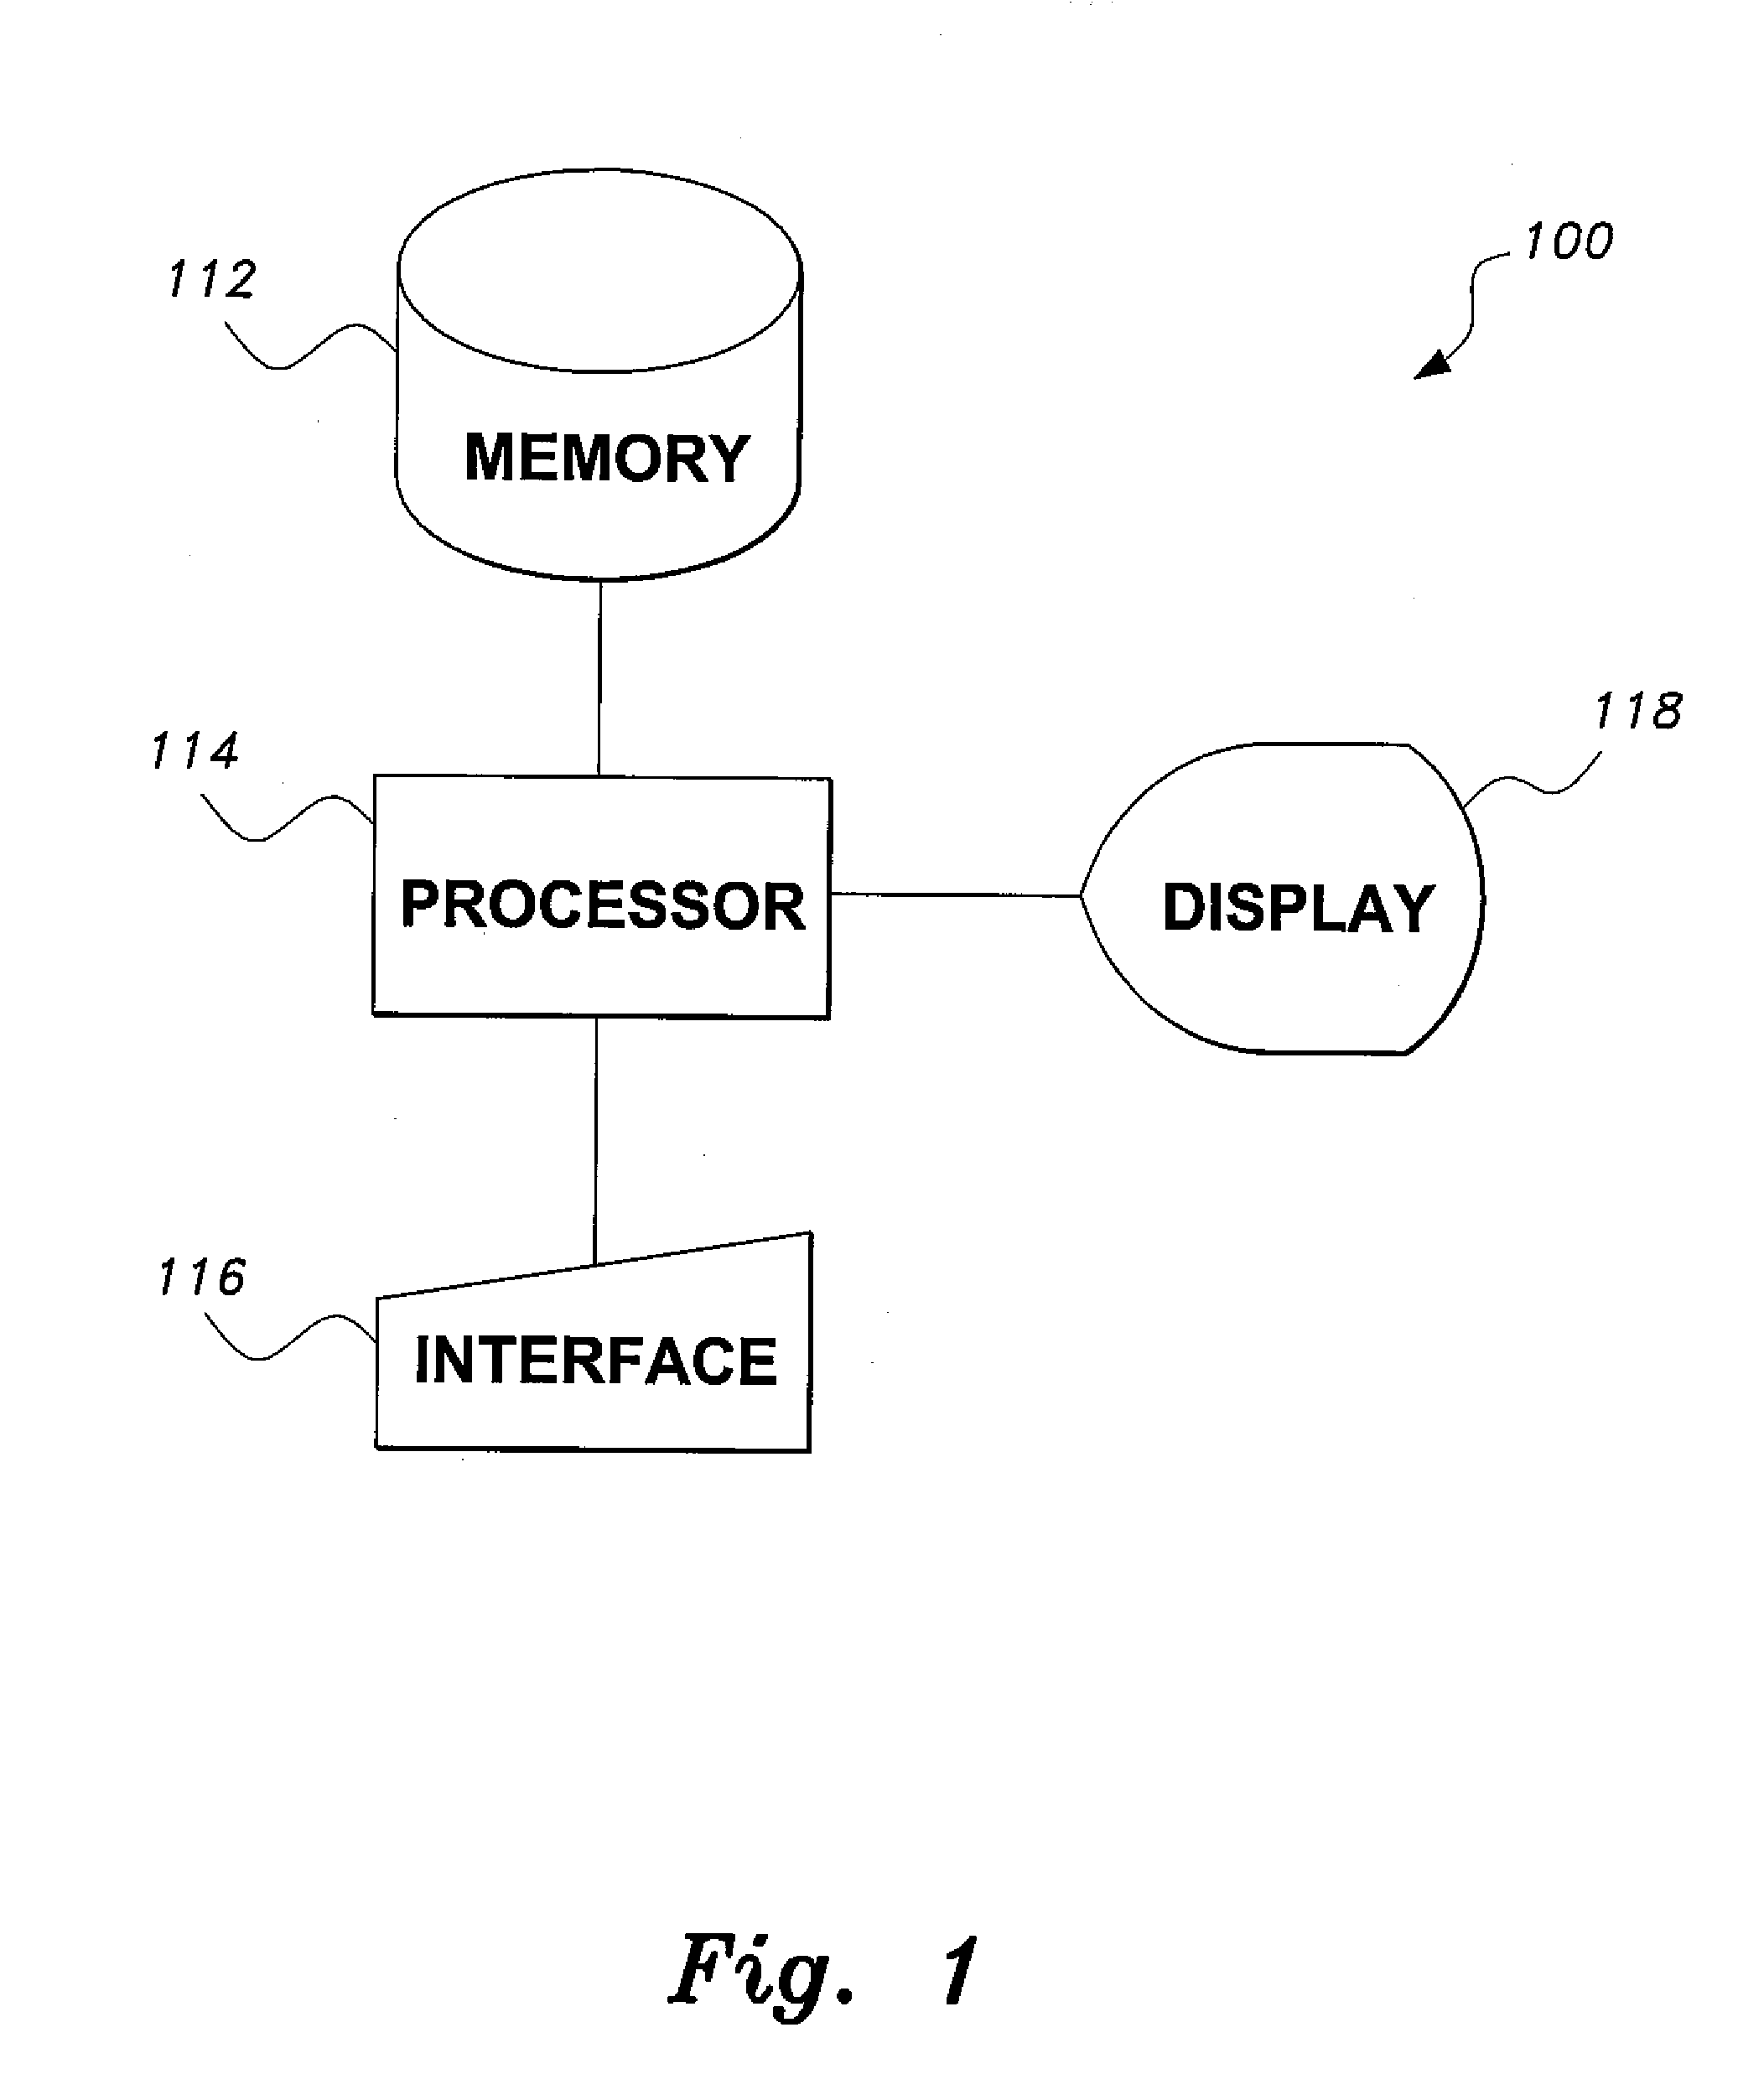 Method for generating a secure cryptographic hash function